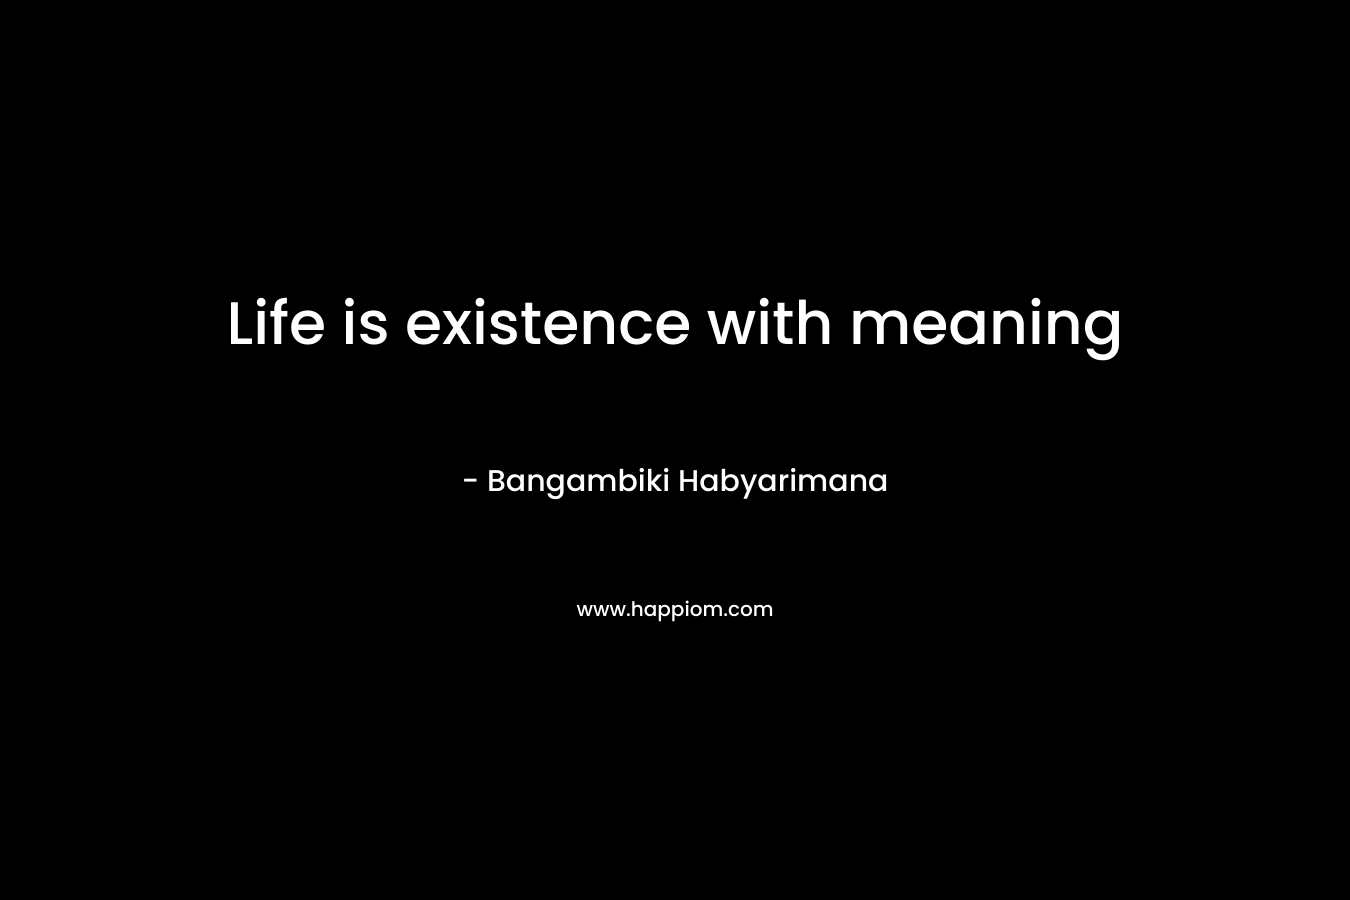 Life is existence with meaning